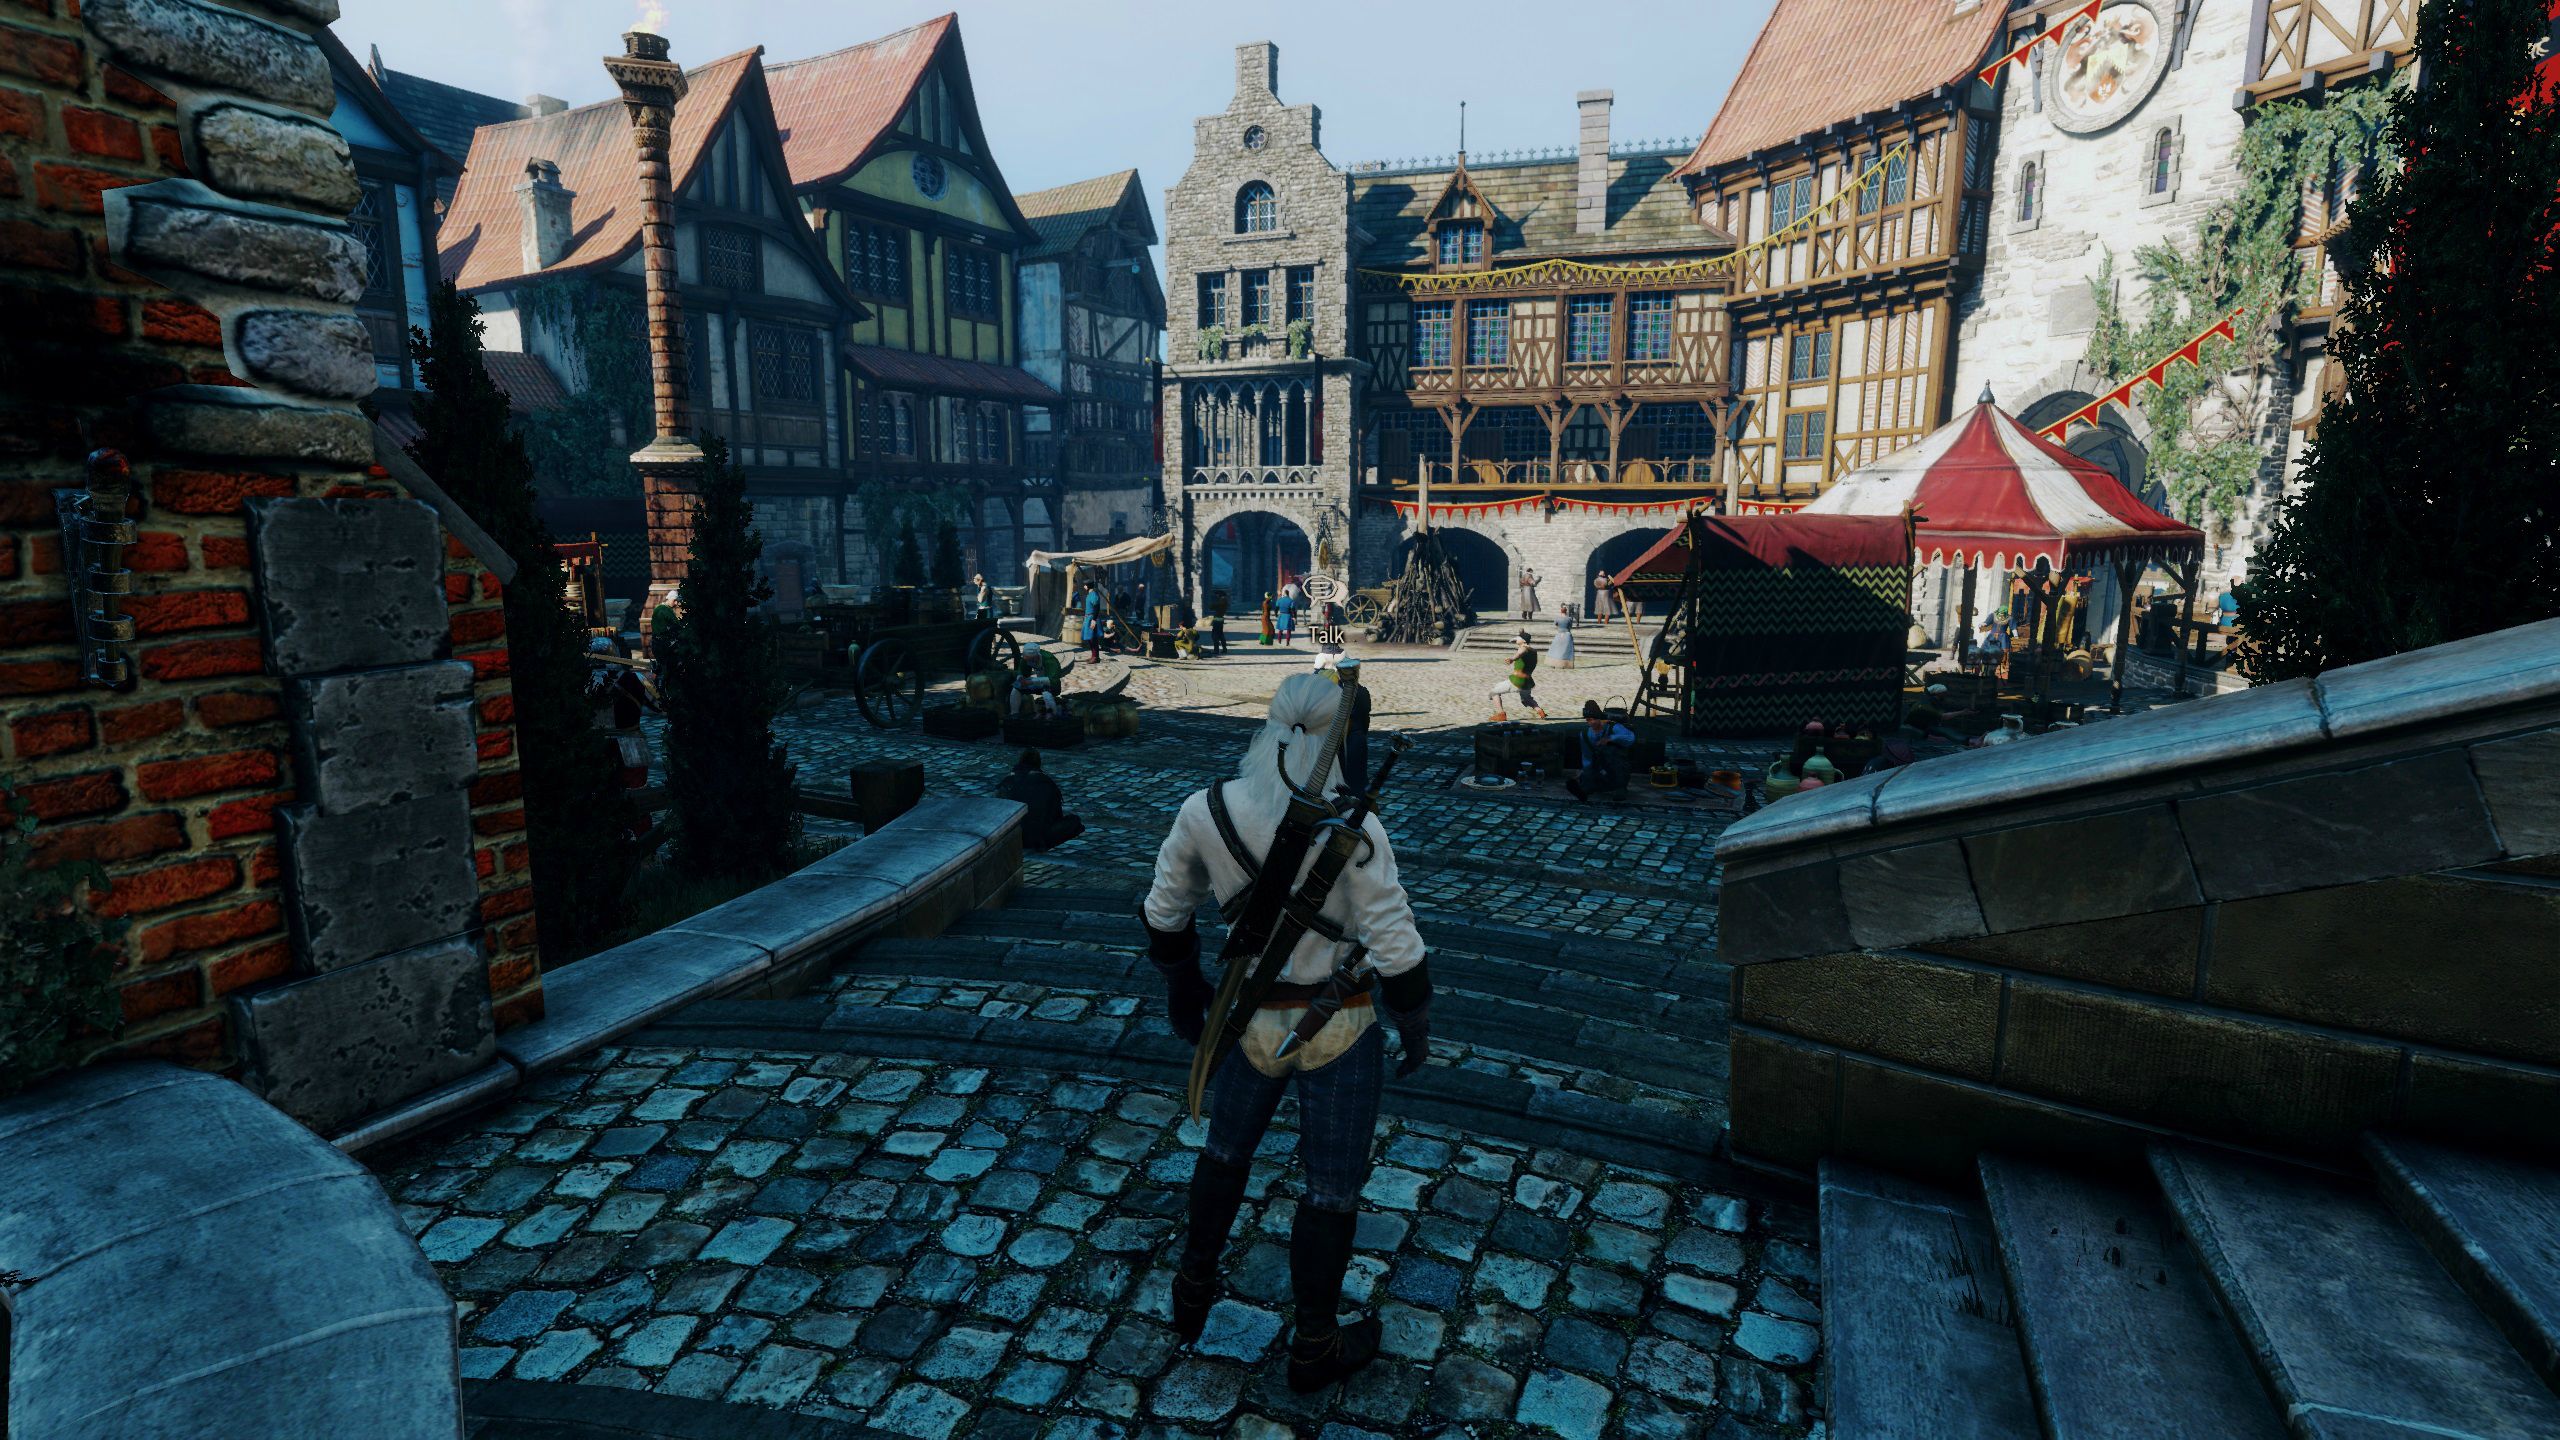 The Witcher 3: Wild Hunt High Res Texture mod and Draw distance mod released